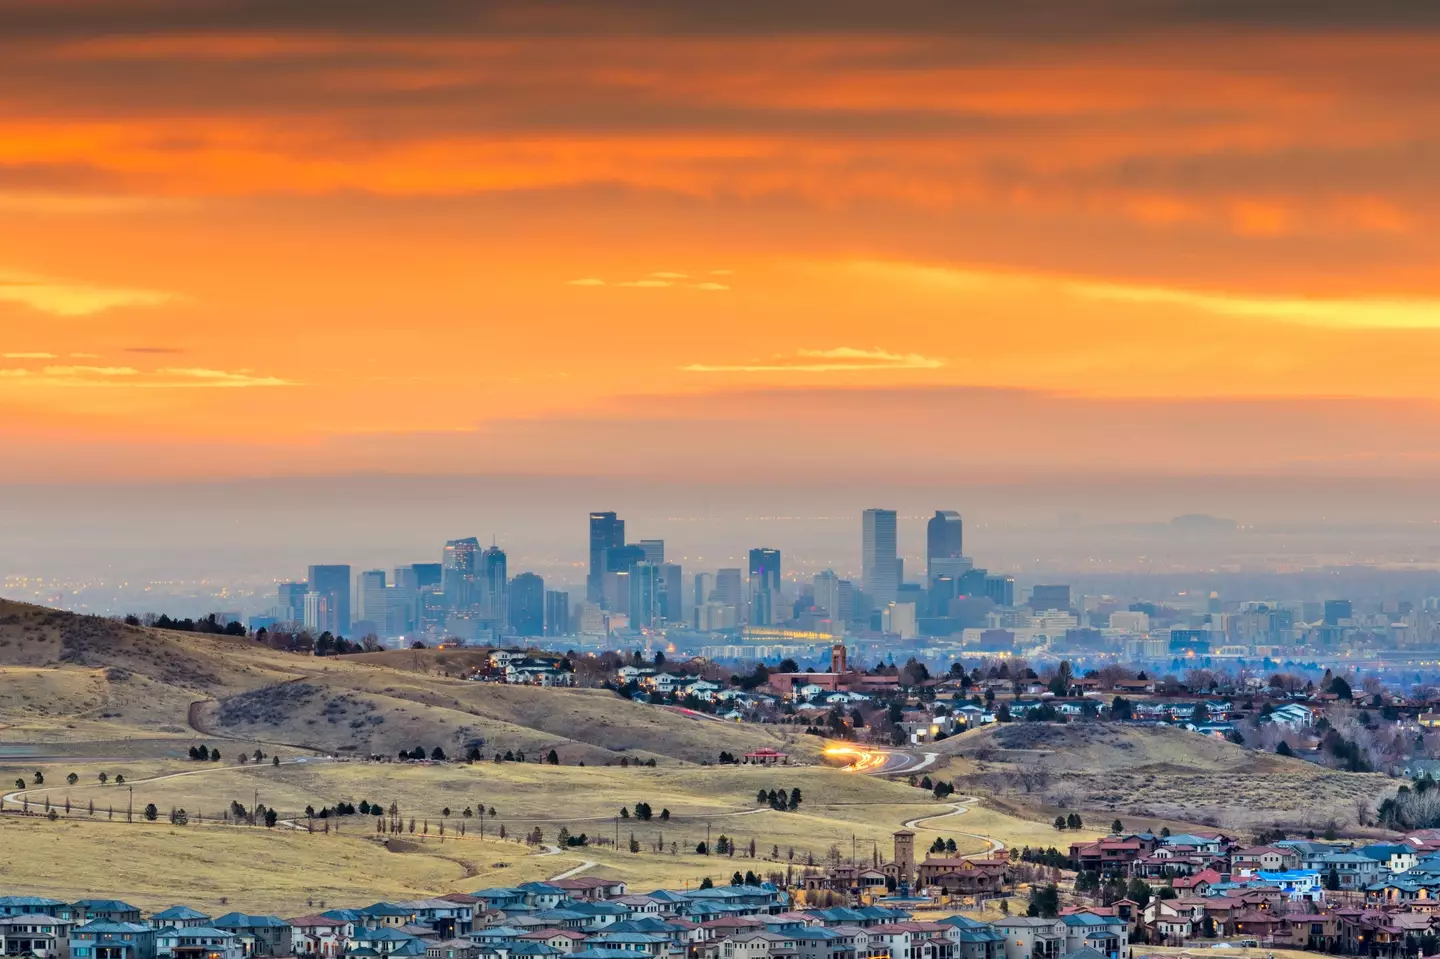 Denver will become one of the first cities to roll out the initiative.